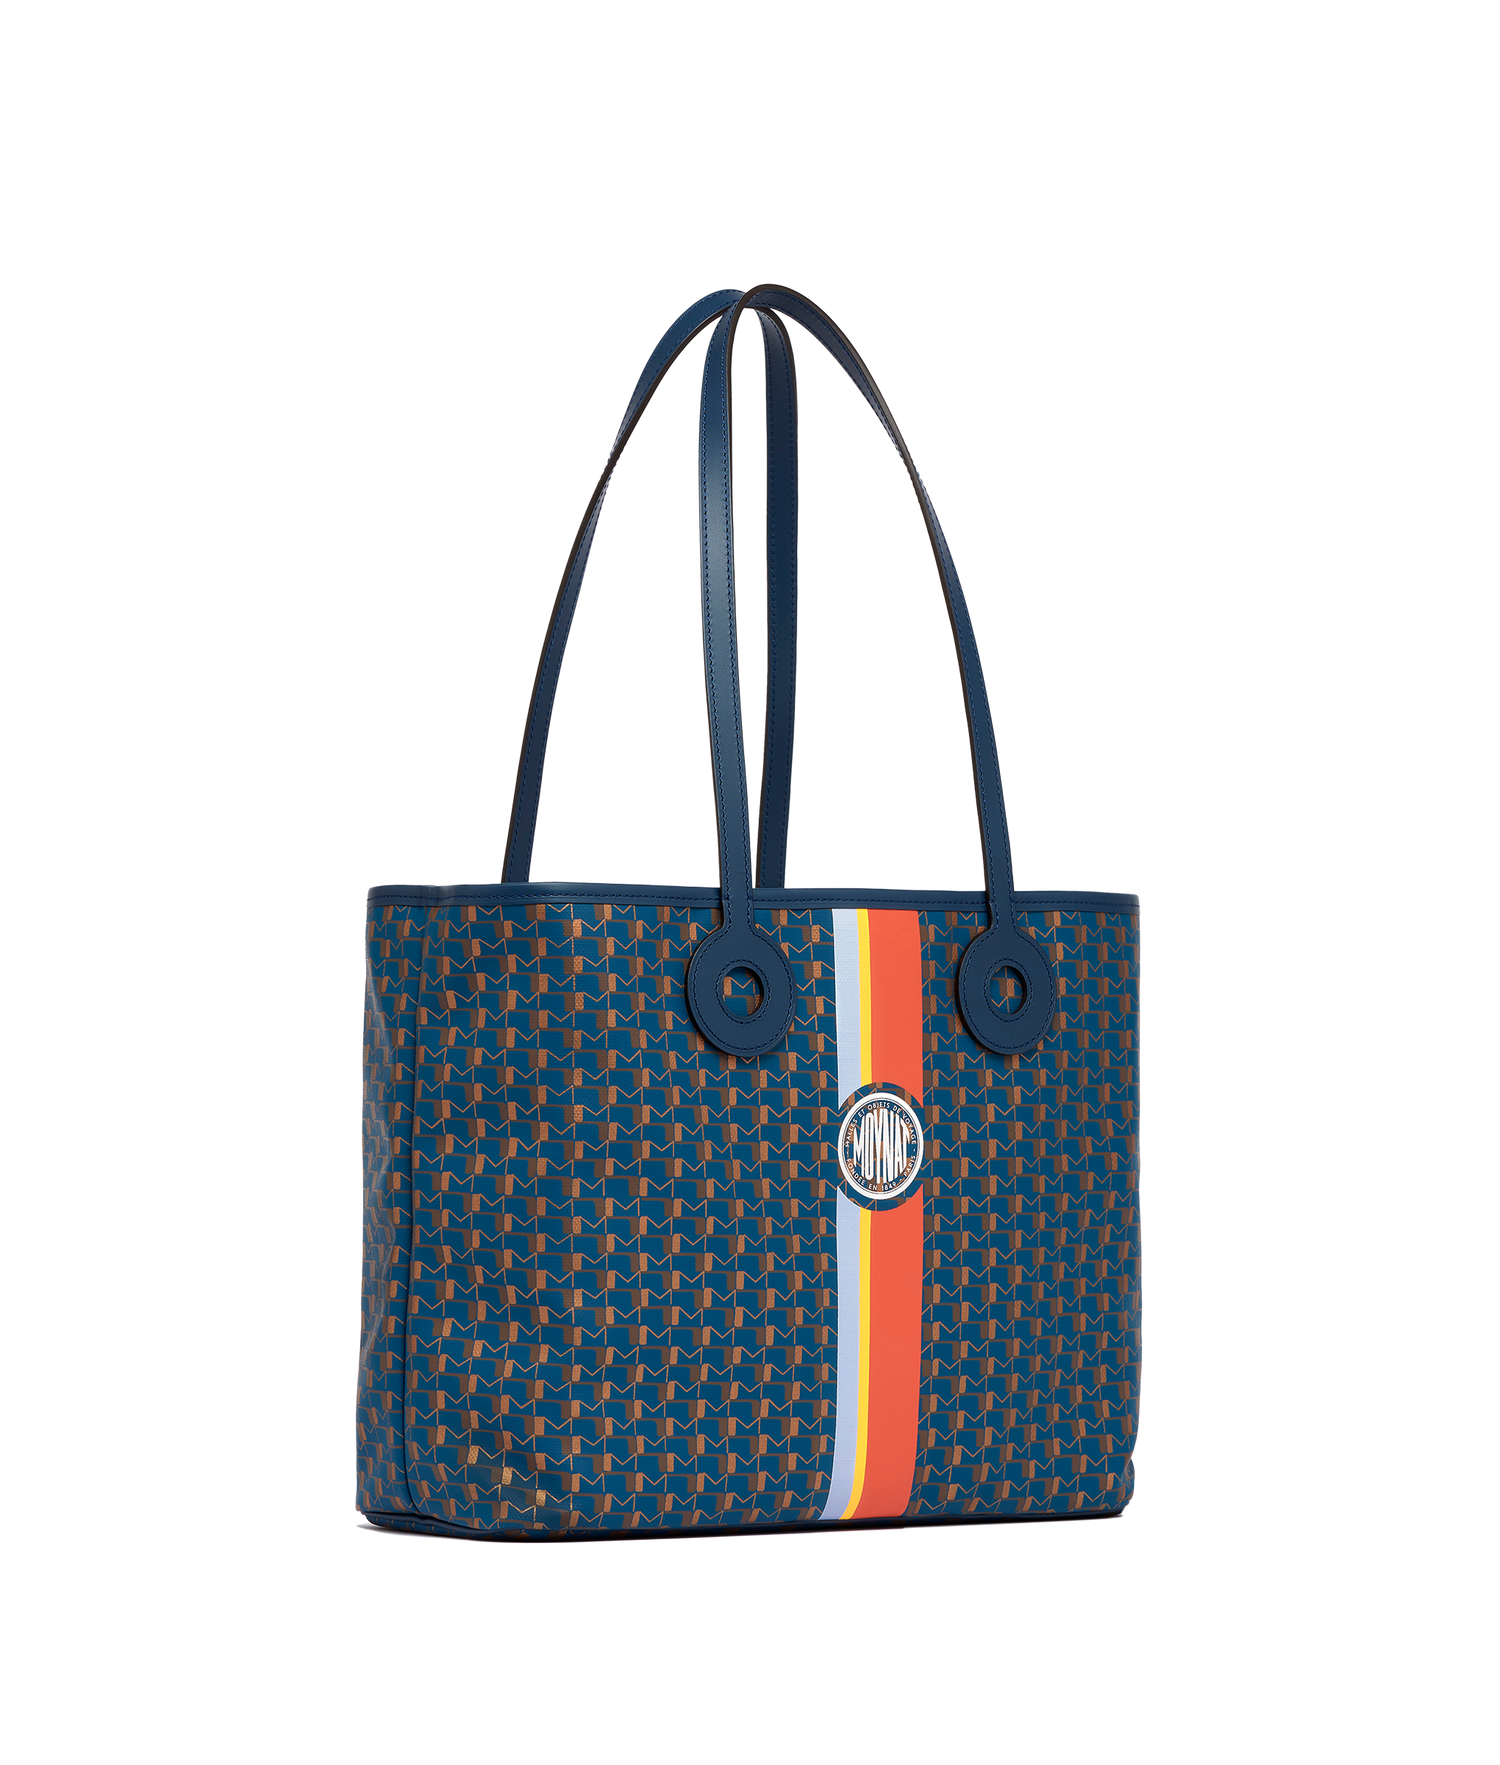 Moynat unveils Oh! Tote bags in emblematic Canvas 1920 Carbon Bronze